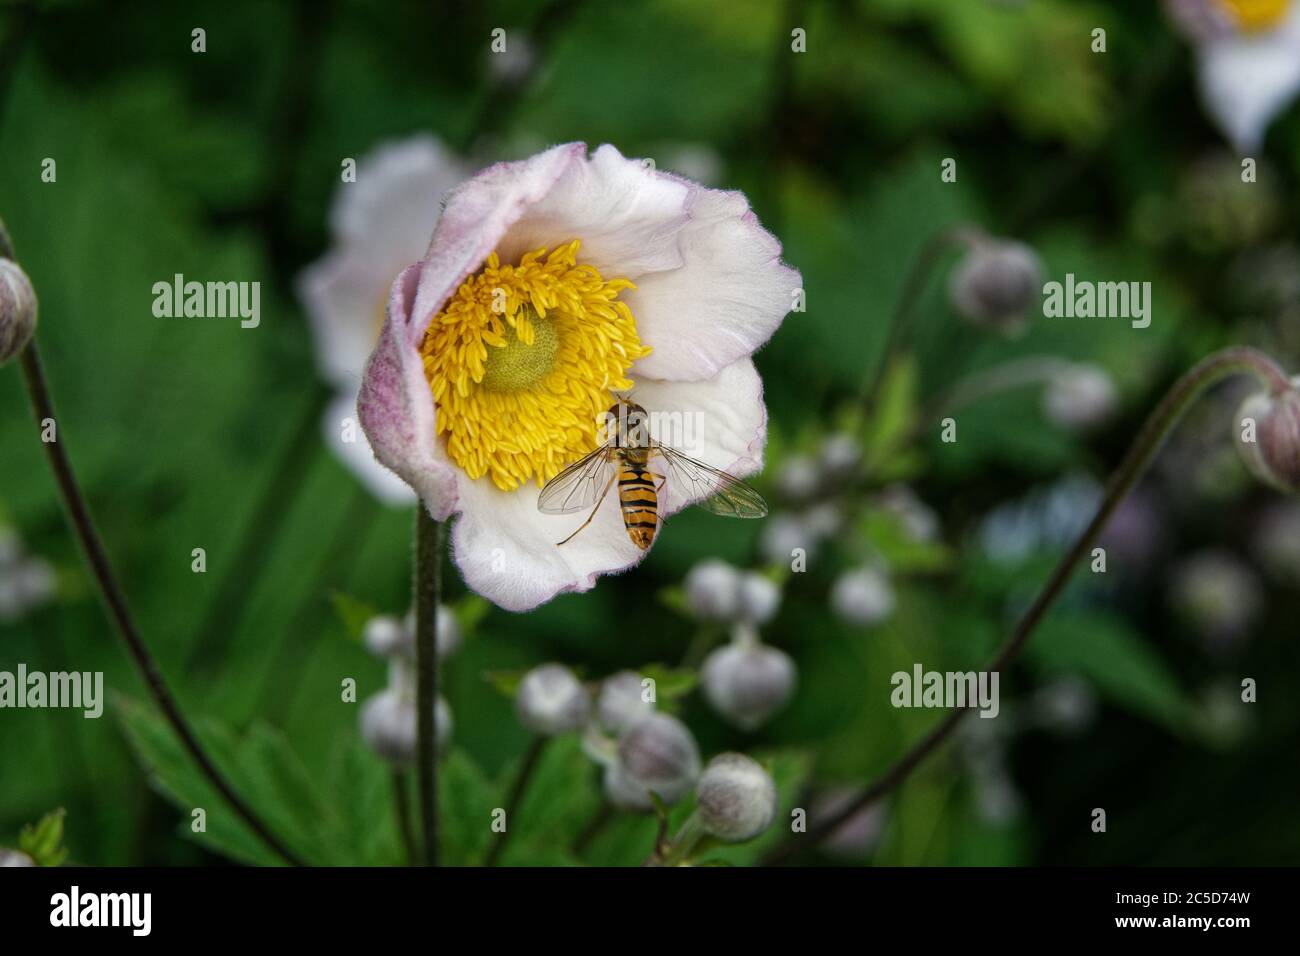 Syrphidae, Anemone hupehensis, close-up of a hoverfly on an anemone against a blurred background Stock Photo